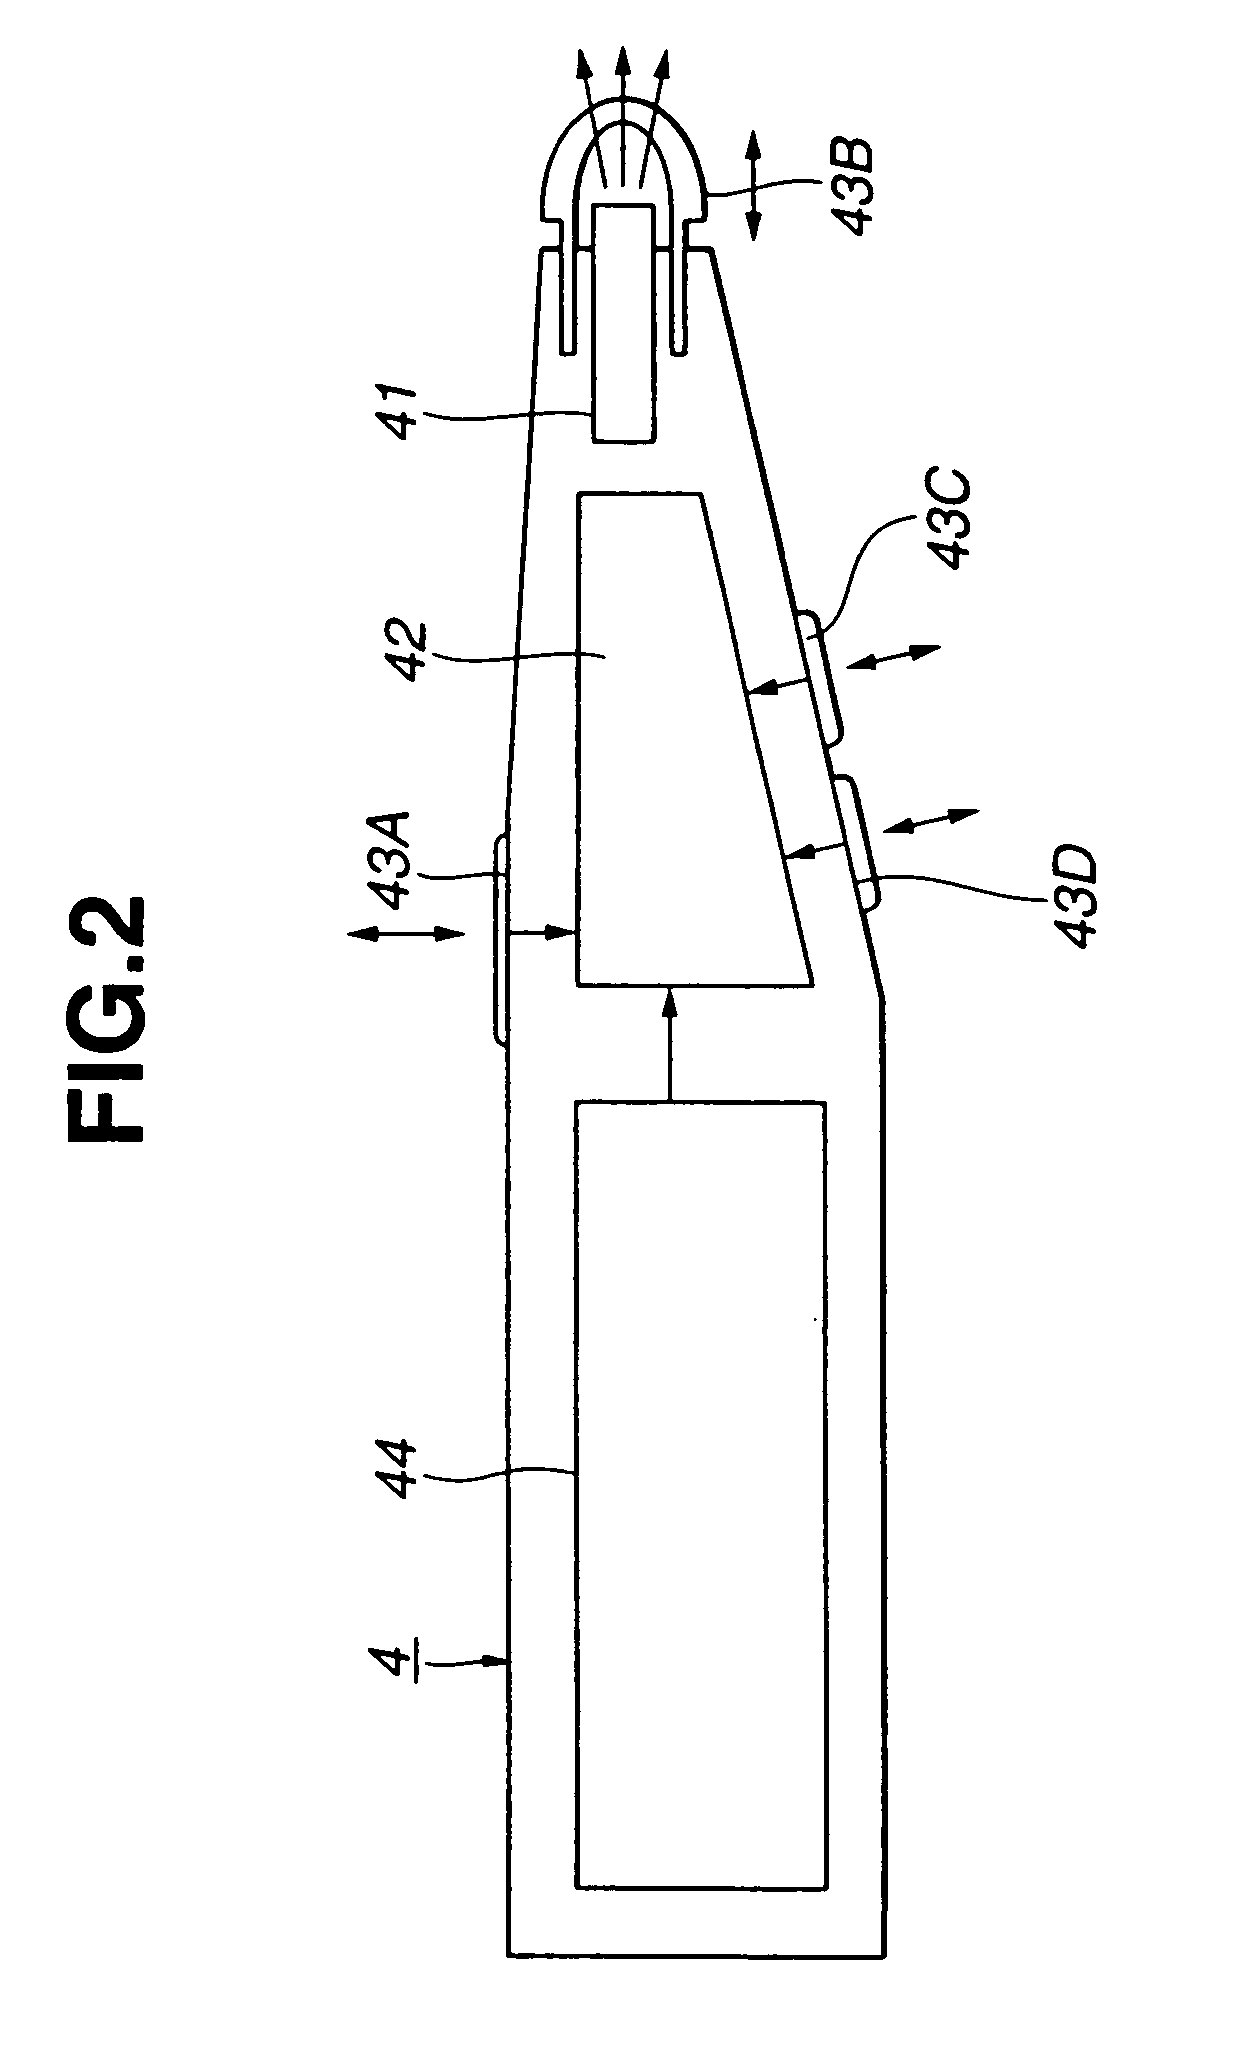 Position information input apparatus and method